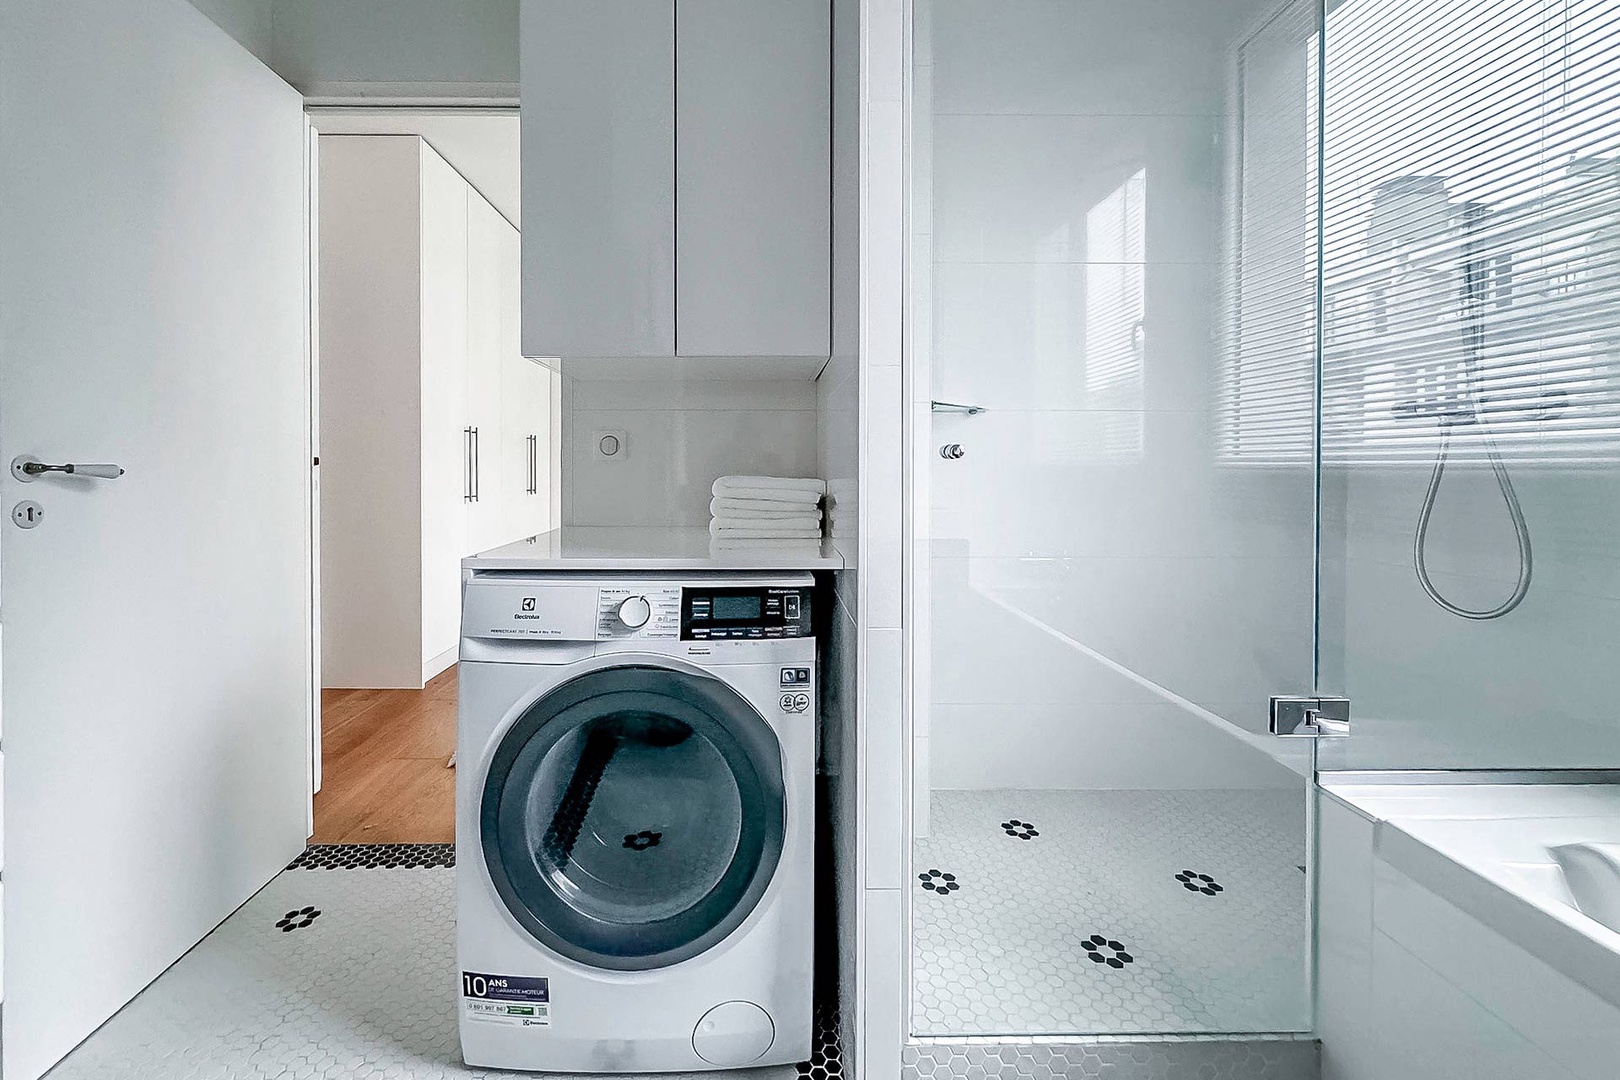 Washer and dryer combo is a handy feature.